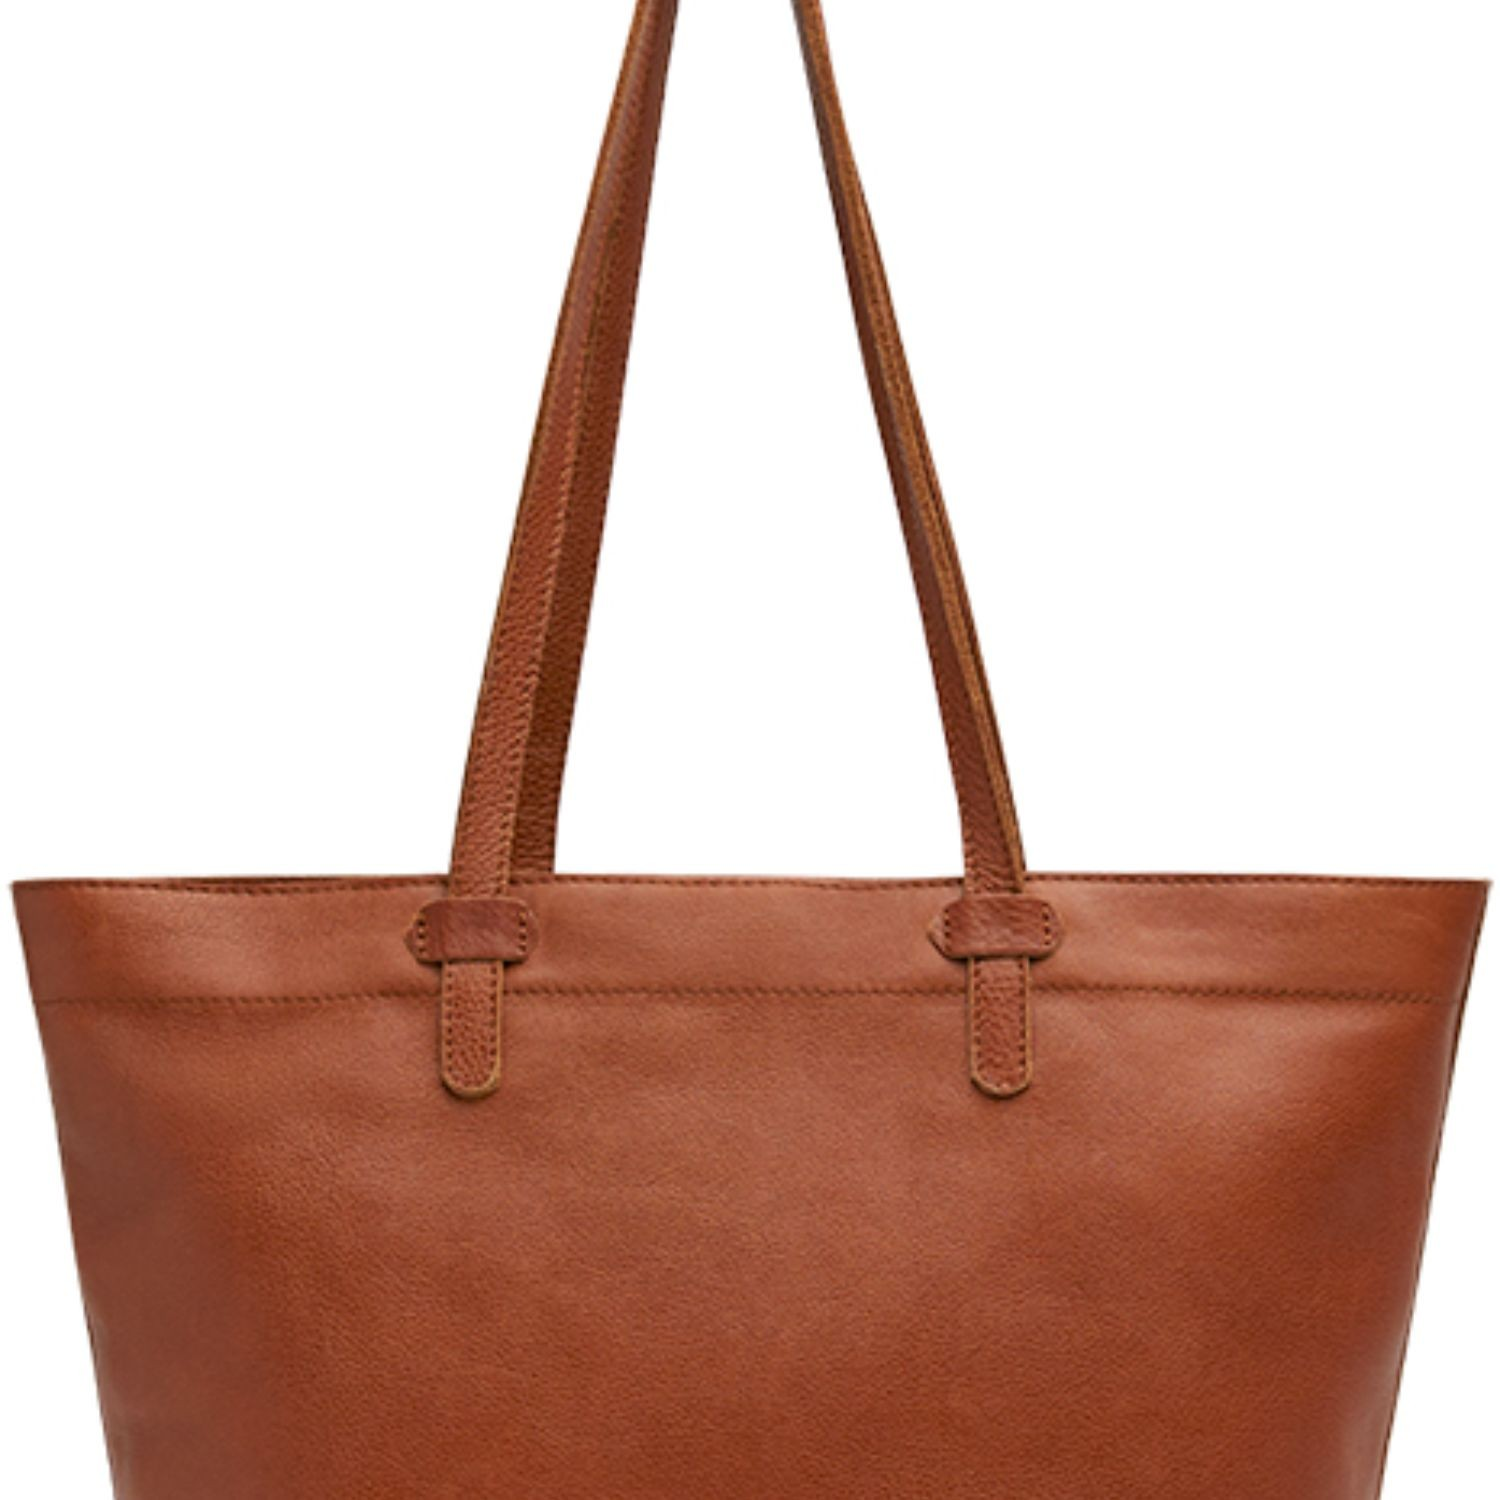 Consuela Daily Tote Bag - Brandy / Stuffology Boutique-Tote Bags-Consuela-Stuffology - Where Vintage Meets Modern, A Boutique for Real Women in Crosbyton, TX